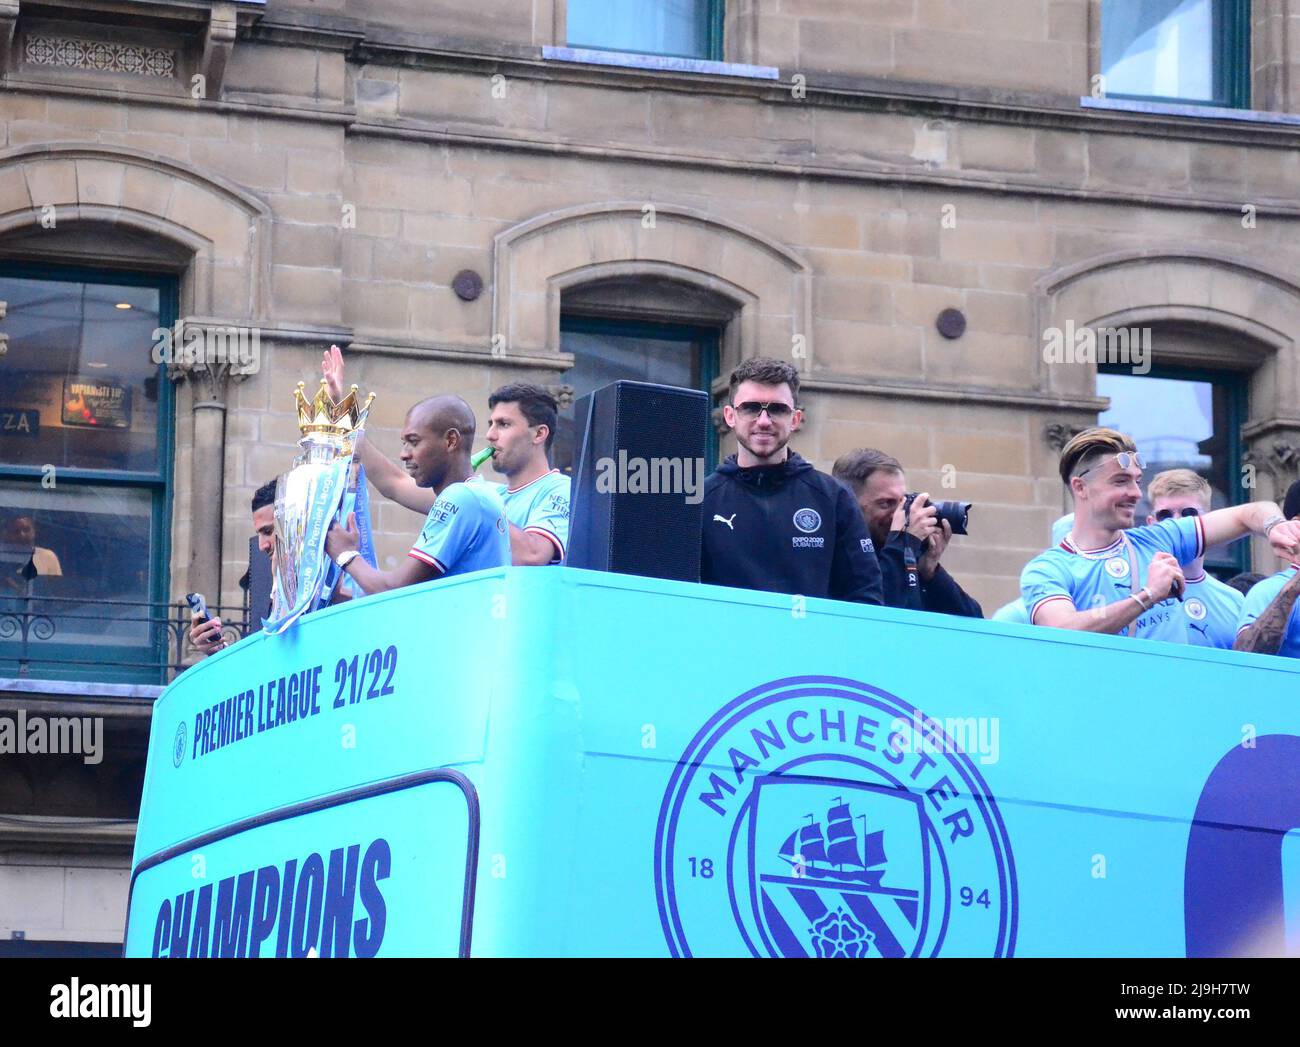 Manchester, UK, 23rd May, 2022. Fernando Luiz Roza, known as Fernandinho, captain of the club, holds the cup. Manchester City Football Club holds a victory parade to celebrate the club's Premier League title win after beating Aston Villa at the Etihad Stadium on 22nd May. The parade of open top buses went through central Manchester, England, United Kingdom. The club said: 'The club will celebrate its victory with fans with an open-top bus parade in Manchester city centre on Monday 23rd May, concluding with a stage show at Deansgate (Beetham Tower).' Credit: Terry Waller/Alamy Live News Stock Photo